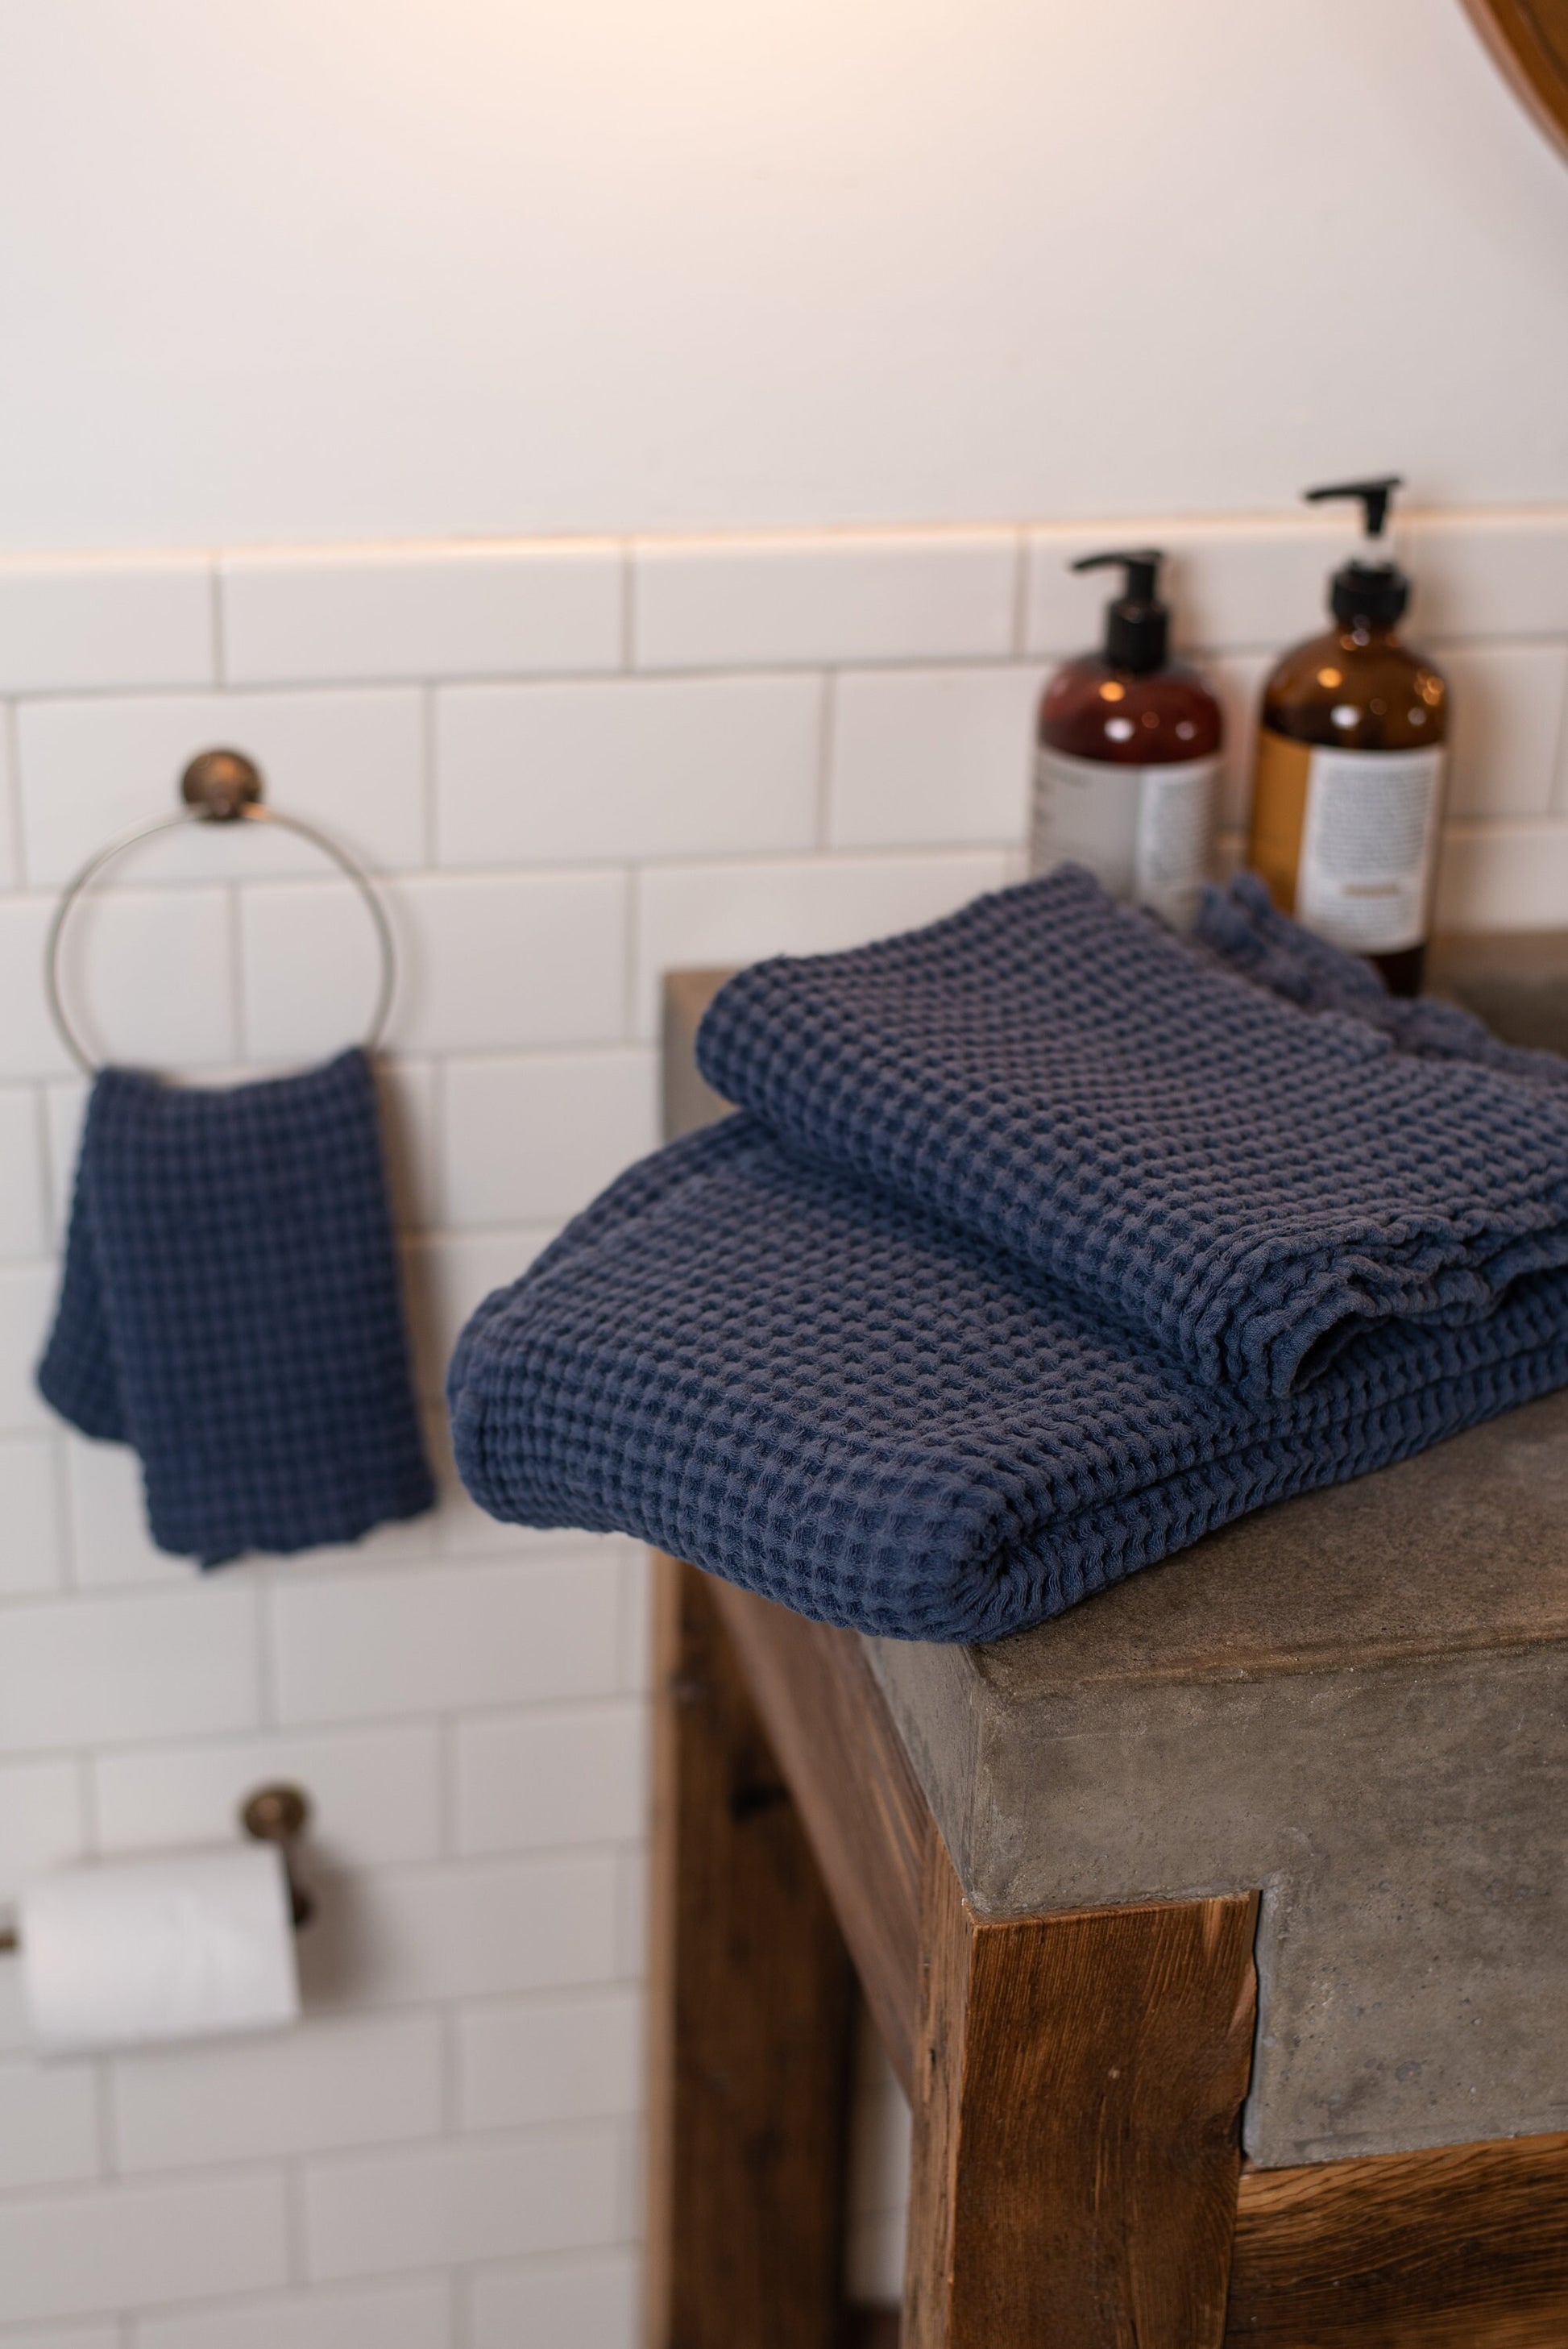 Luxurious Waffle Linen Towel Collection in Various Sizes - Eco-friendly and Comfortable